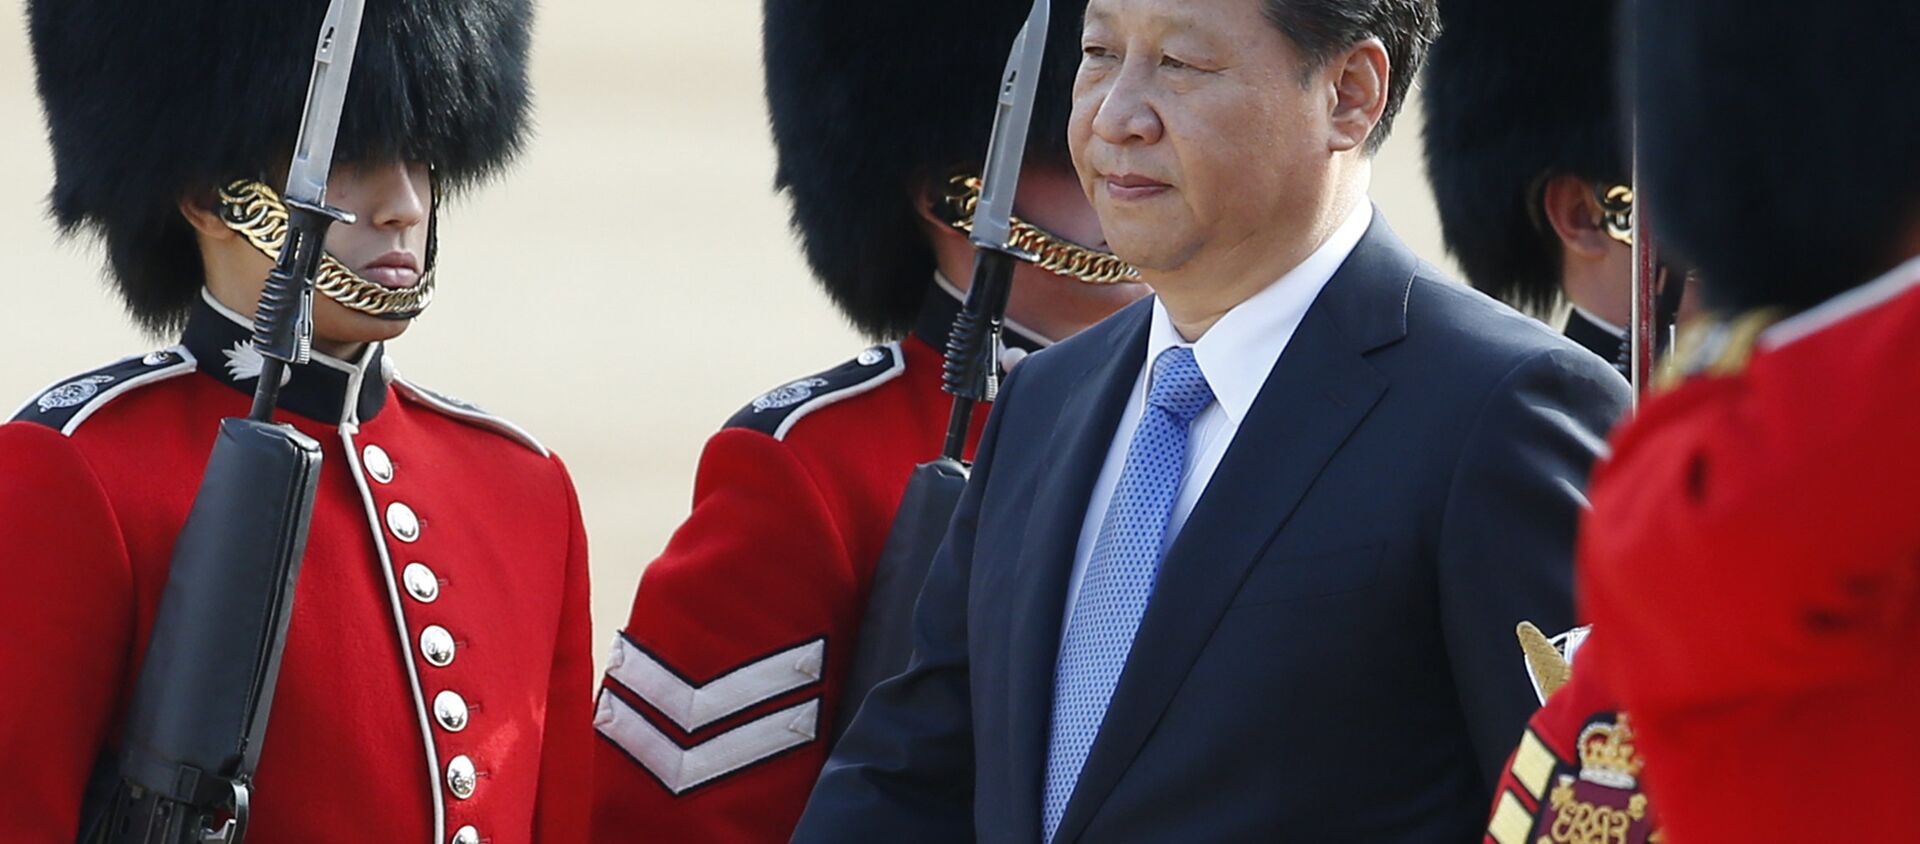 Chinese President Xi Jinping is escorted as he inspects a guard of honour during the official welcome ceremony at Horse Guards Parade in London on Tuesday, 20 October 2015. - Sputnik International, 1920, 26.07.2021